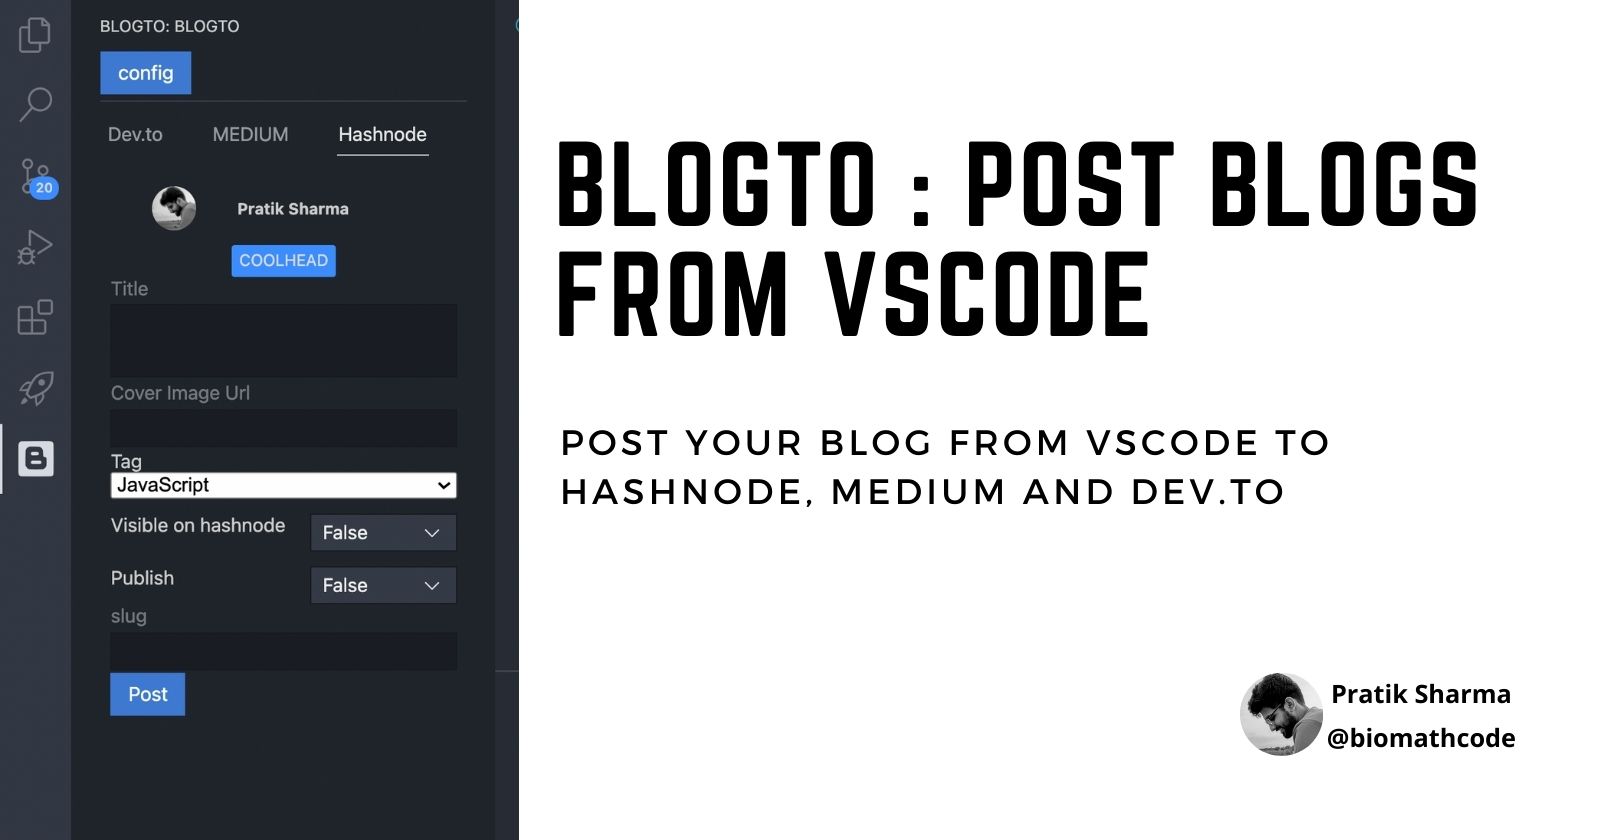 Vscode extension to help you post blogs to Hashnode, Medium and Dev.to